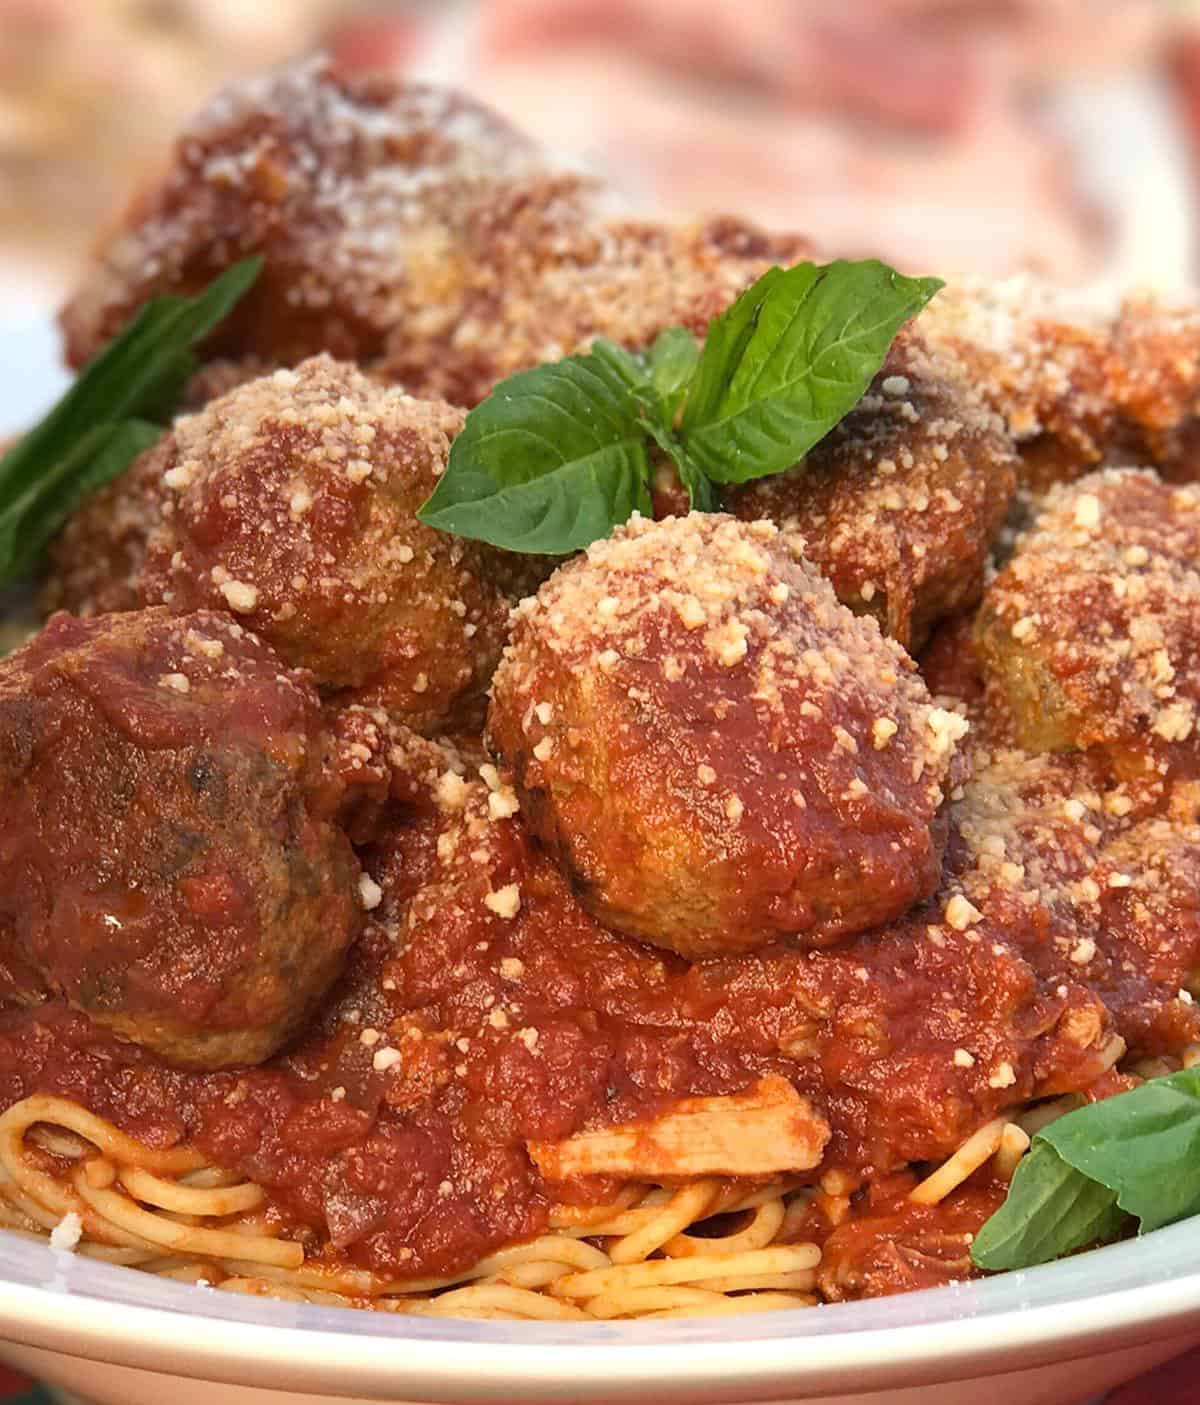  These meatballs are perfect for adding to pasta, sandwiches, or on their own.